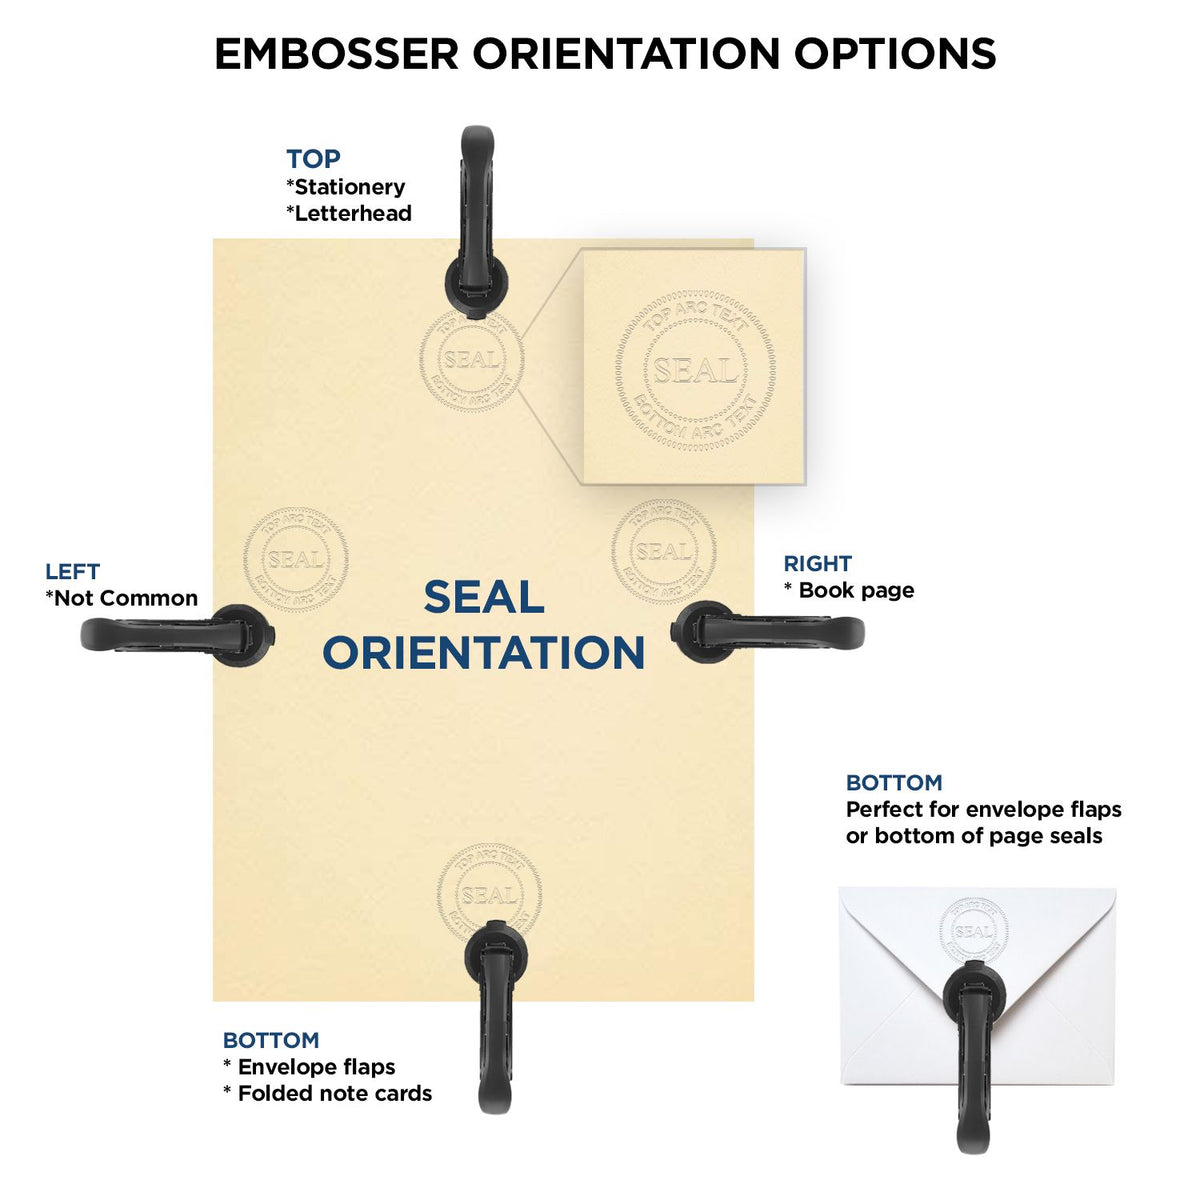 An infographic for the Heavy Duty Cast Iron Missouri Land Surveyor Seal Embosser showing embosser orientation, this is showing examples of a top, bottom, right and left insert.